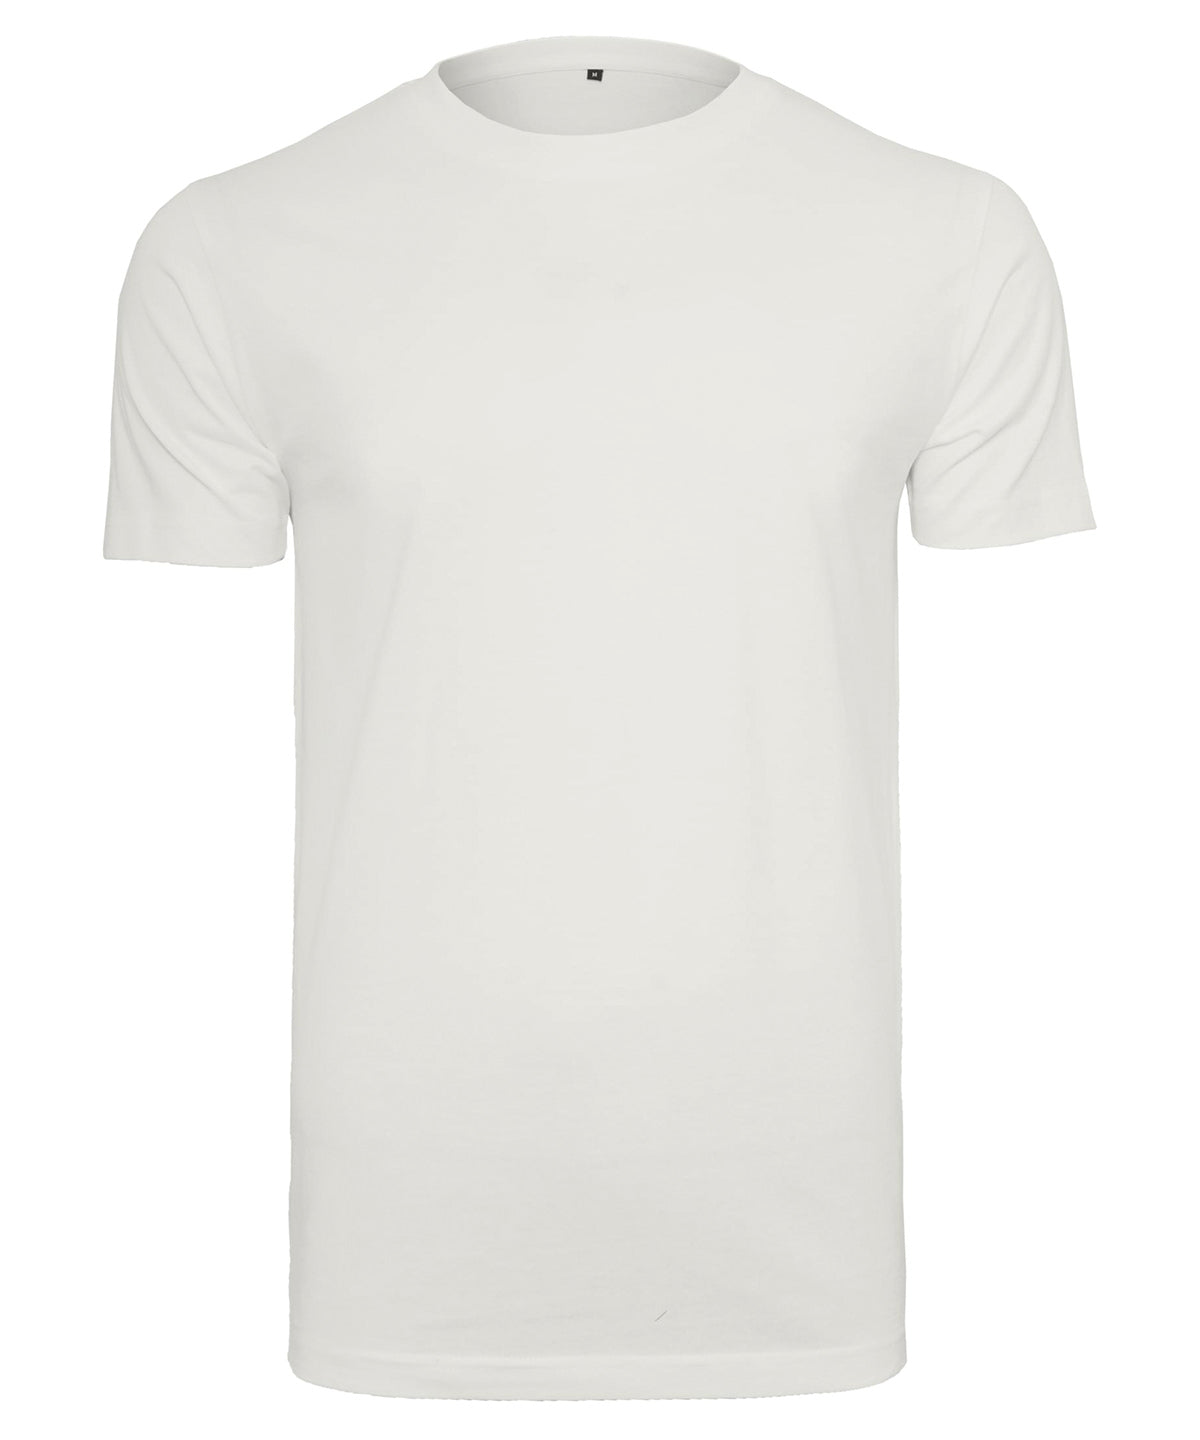 Personalised T-Shirts - Light Grey Build Your Brand T-shirt round-neck